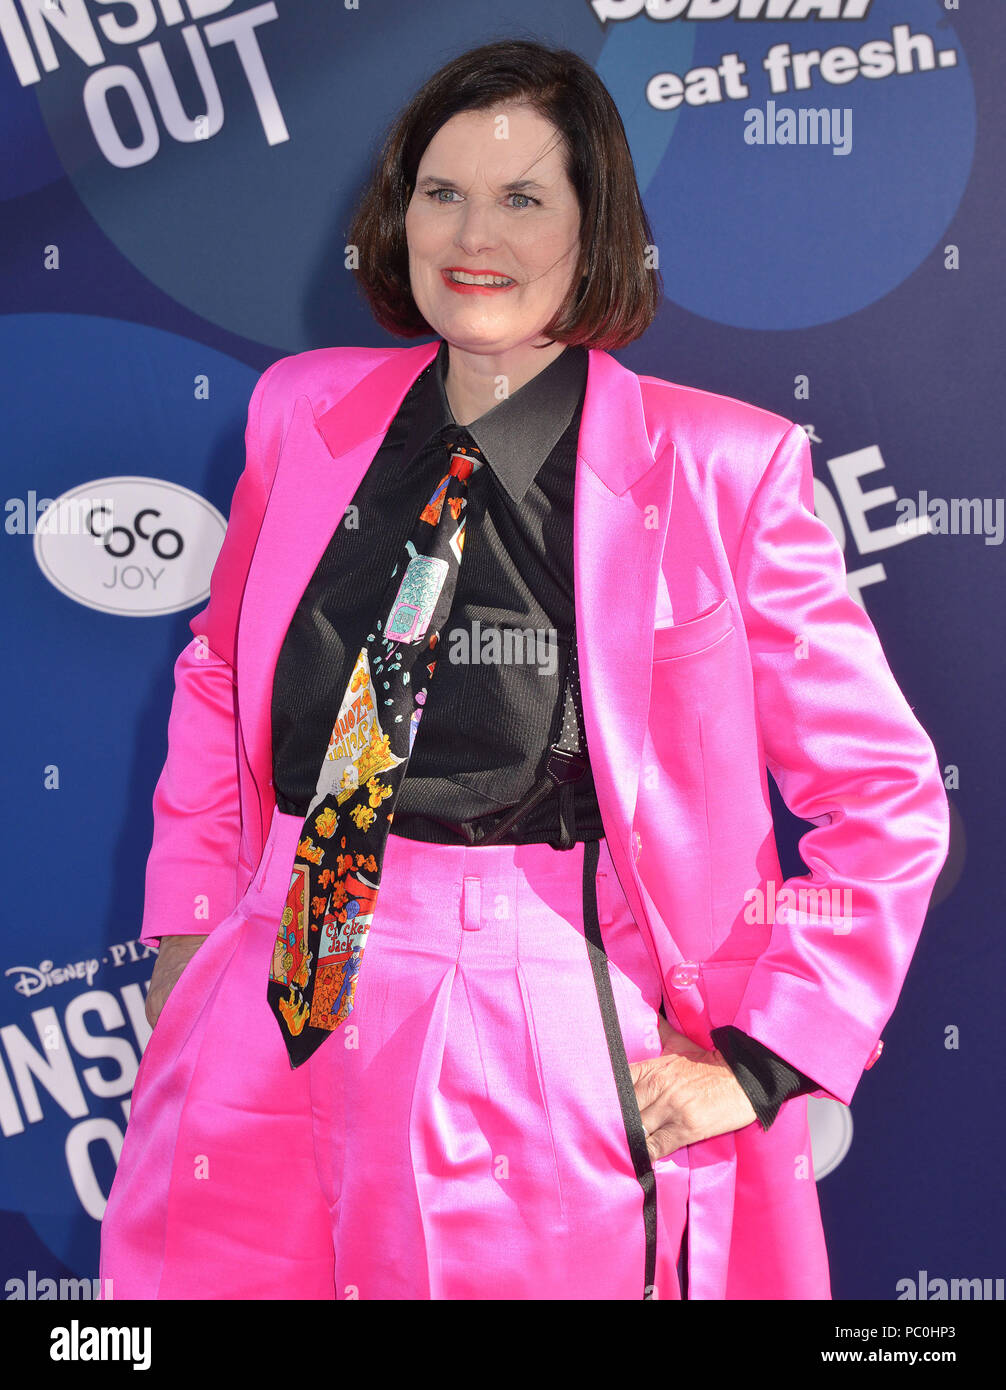 paula poundstone 107 at the  Inside Out Premiere at the El Capitan Theatre in Los Angeles. June, 8, 2015.paula poundstone 107 ------------- Red Carpet Event, Vertical, USA, Film Industry, Celebrities,  Photography, Bestof, Arts Culture and Entertainment, Topix Celebrities fashion /  Vertical, Best of, Event in Hollywood Life - California,  Red Carpet and backstage, USA, Film Industry, Celebrities,  movie celebrities, TV celebrities, Music celebrities, Photography, Bestof, Arts Culture and Entertainment,  Topix, Three Quarters, vertical, one person,, from the year , 2015, inquiry tsuni@Gamma-US Stock Photo